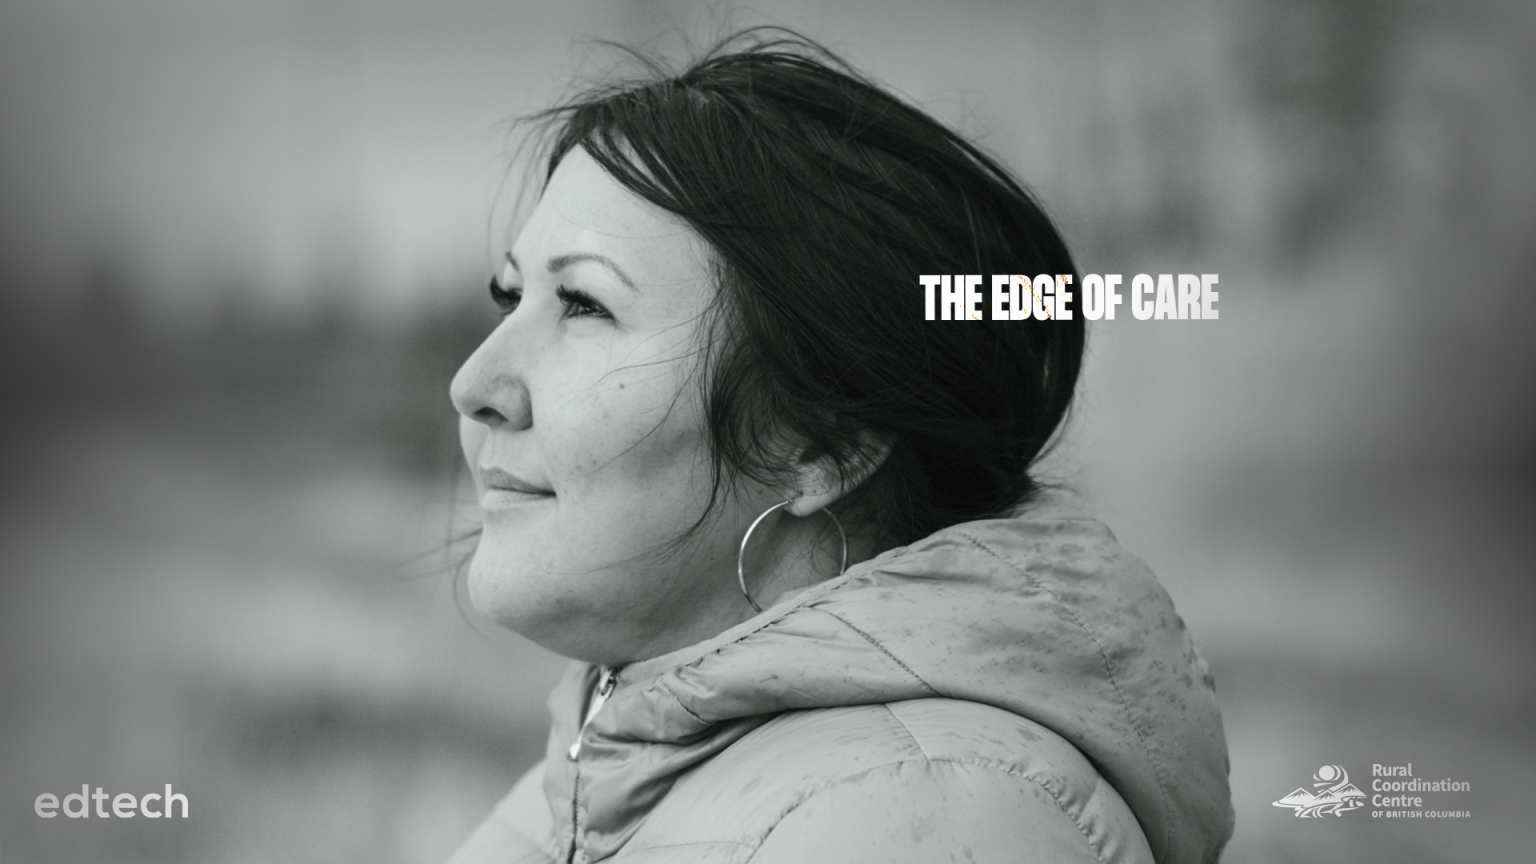 Production still of Health Director Crystal French from cinematic documentary THE EDGE OF CARE